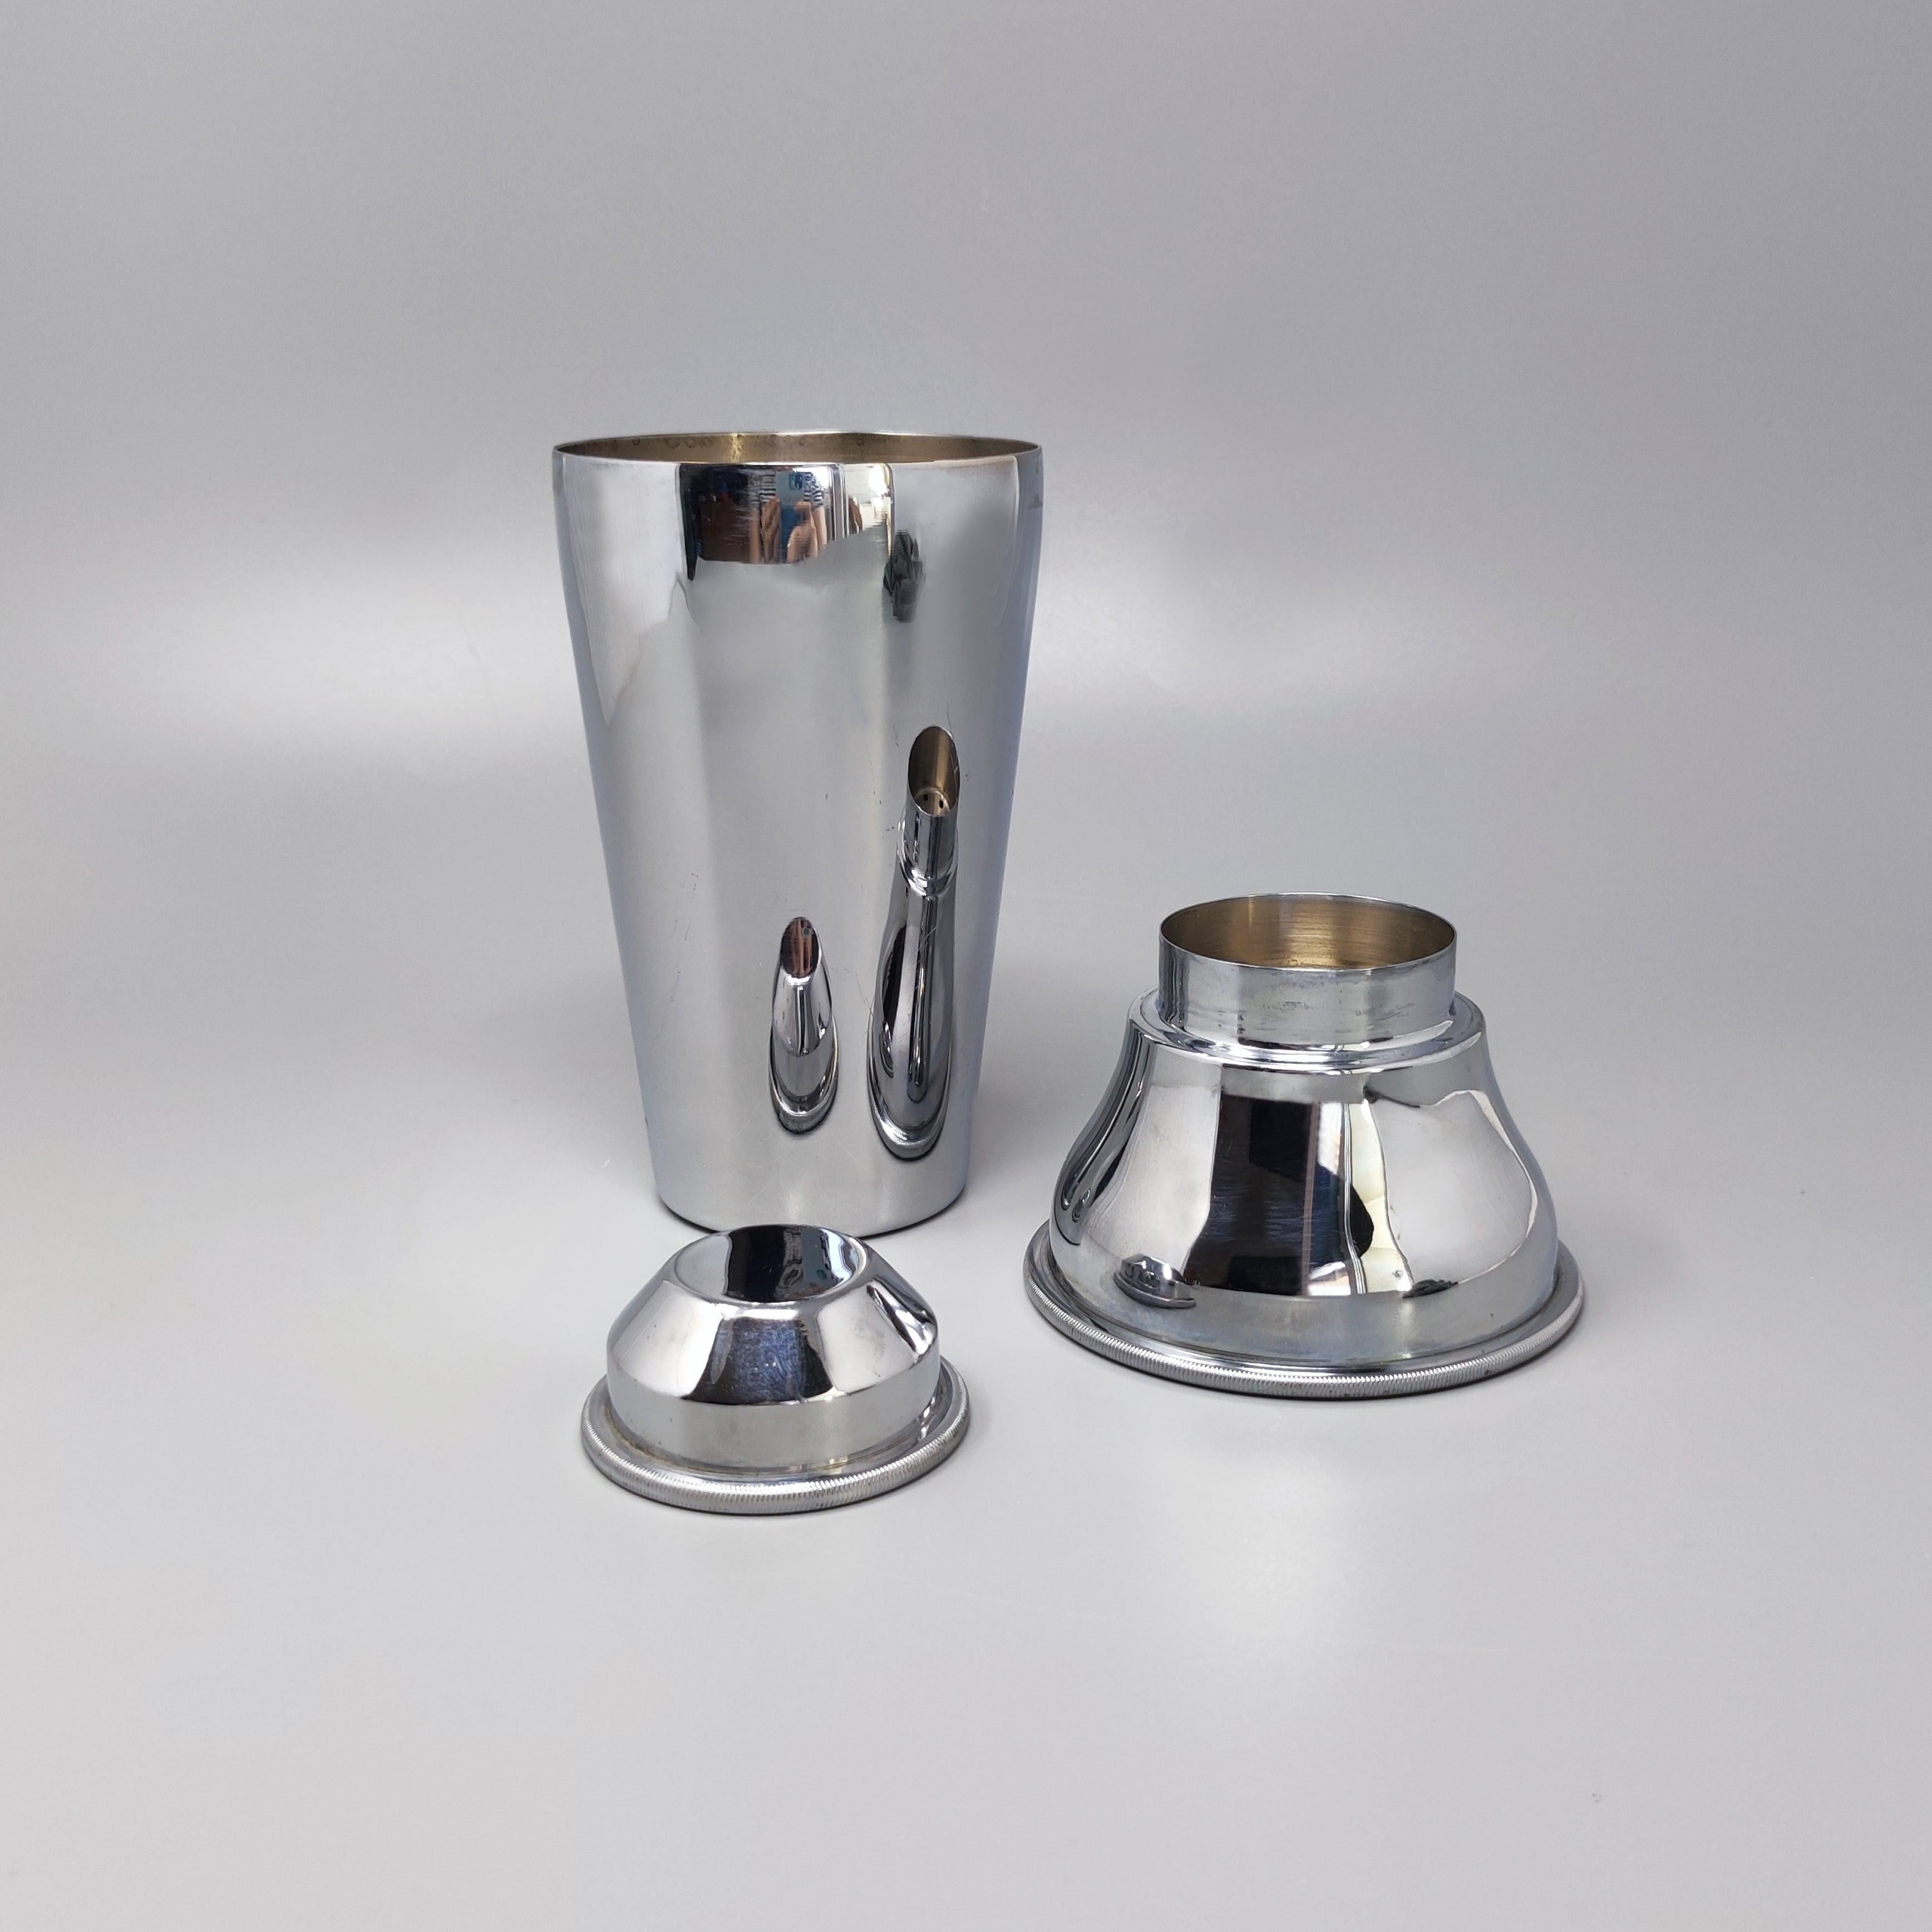 Italian 1950s Stunning MEPRA Cocktail Shaker in Stainless Steel, Made in Italy For Sale